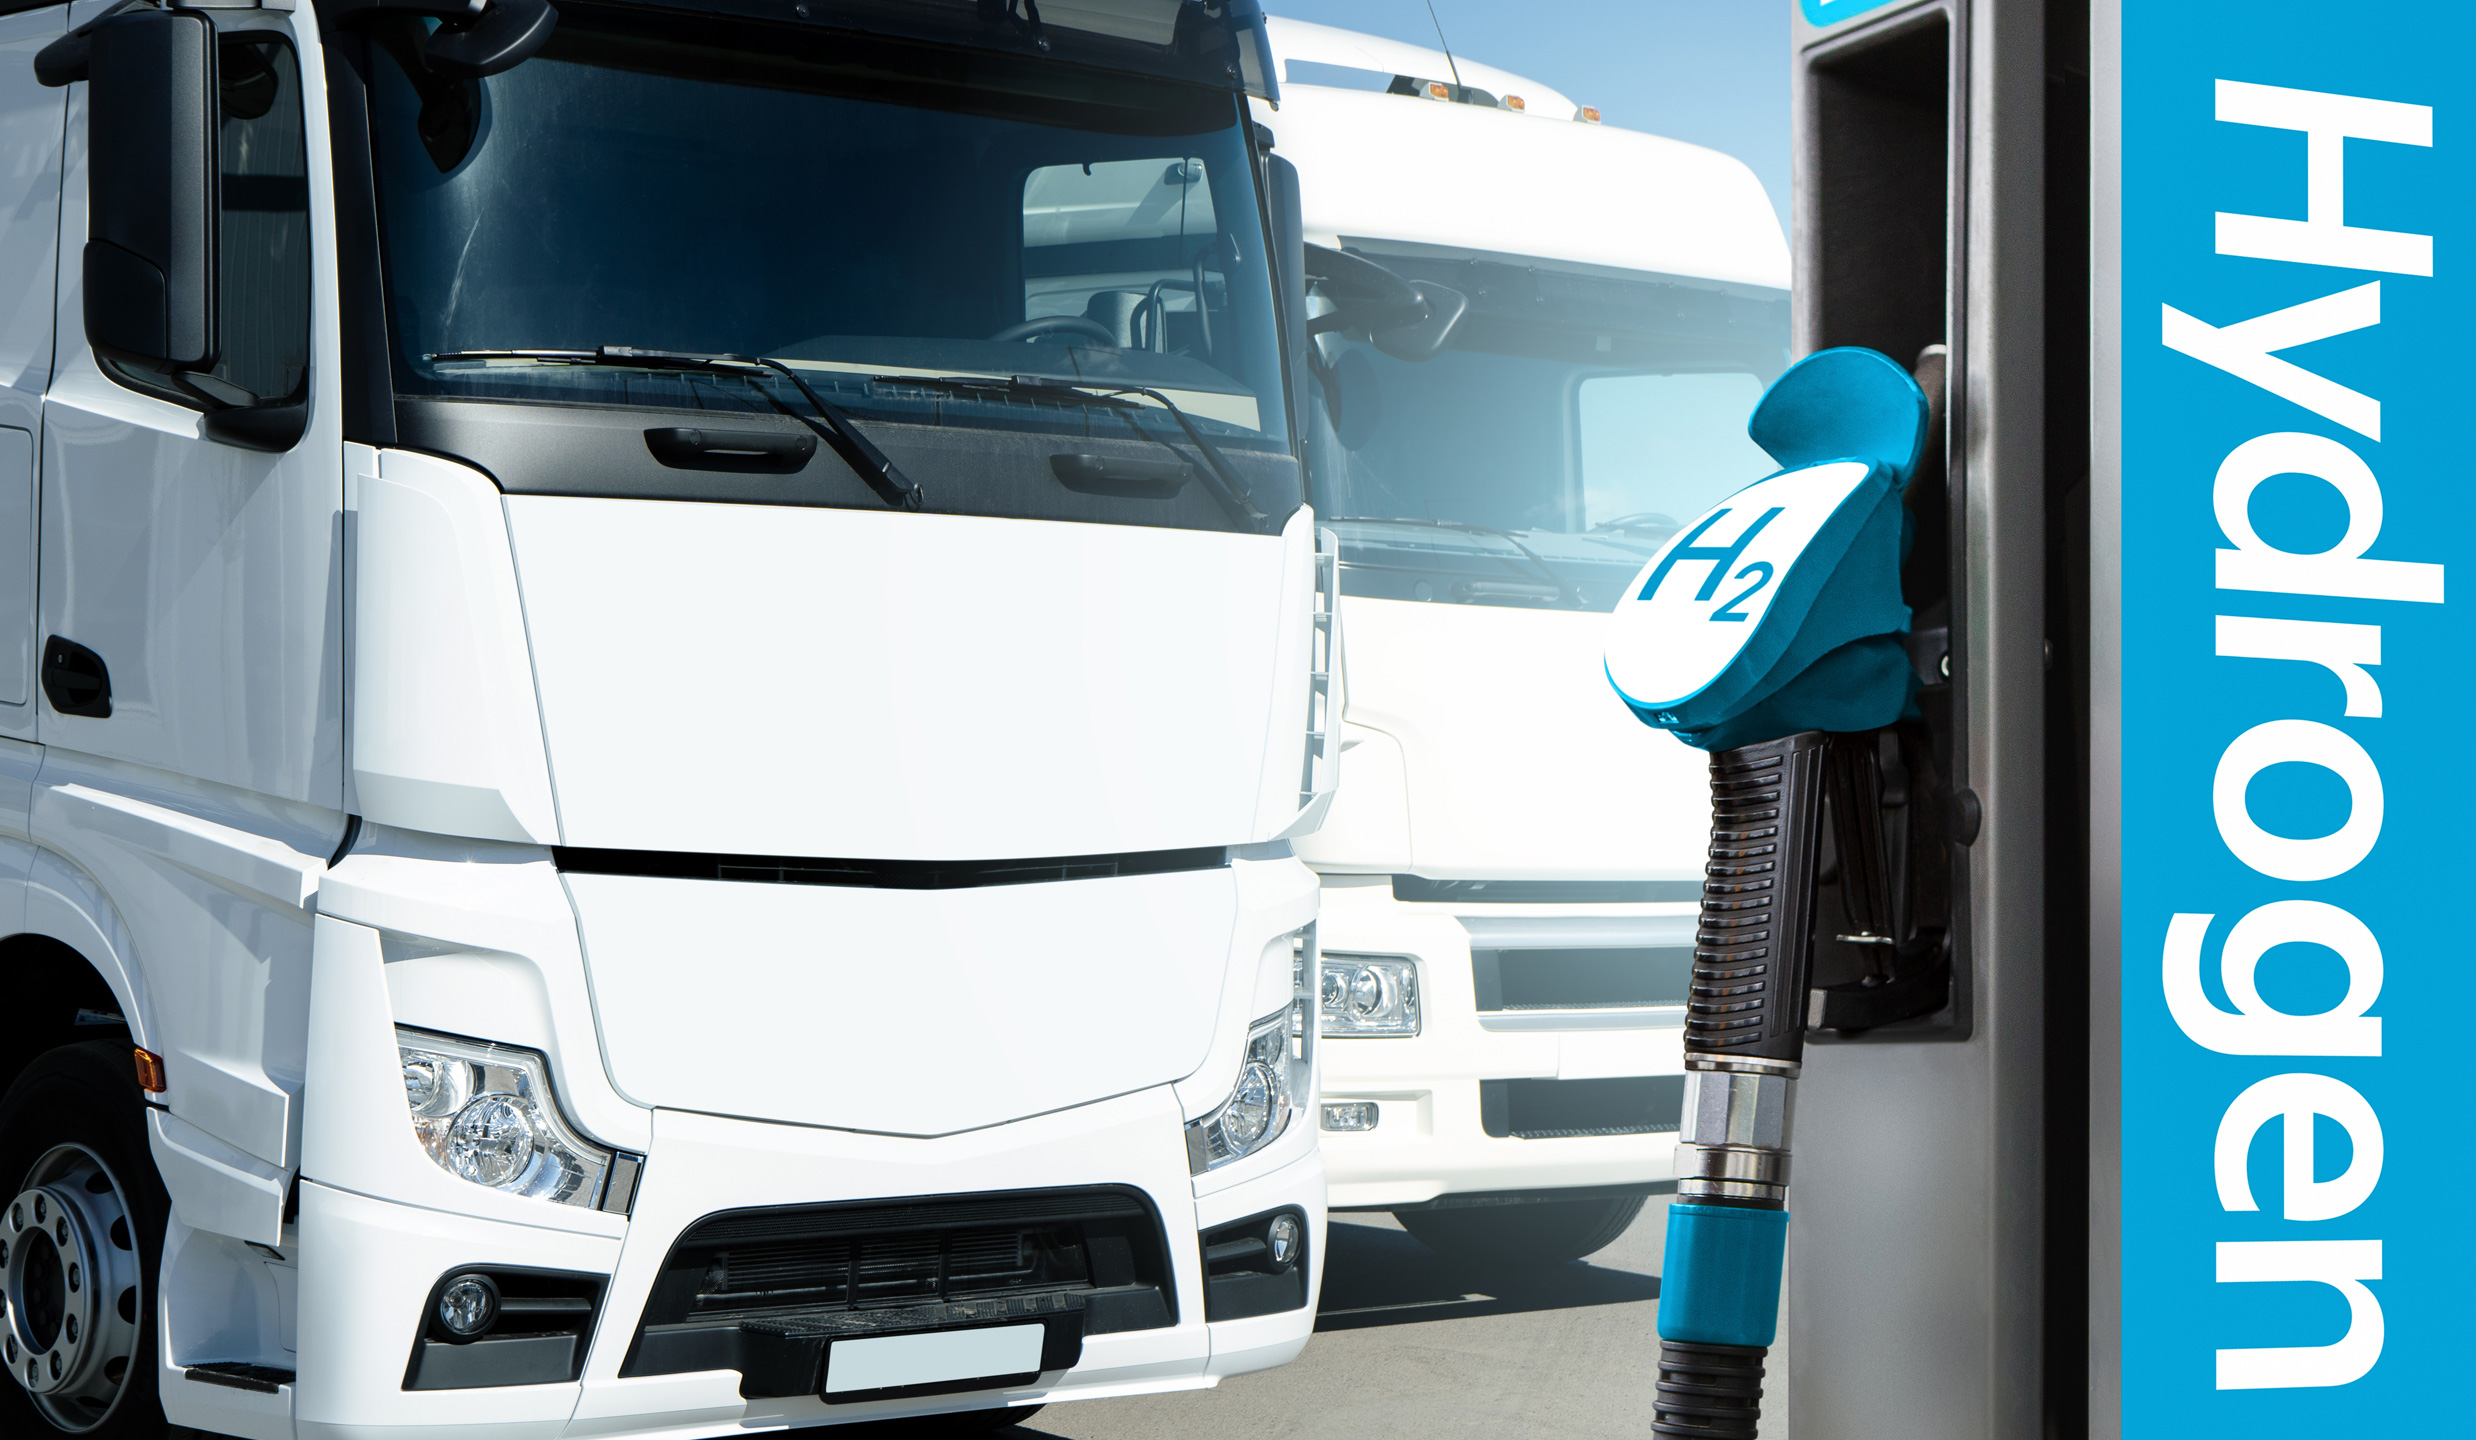 camion a idrogeno hydrogen vehicle systems